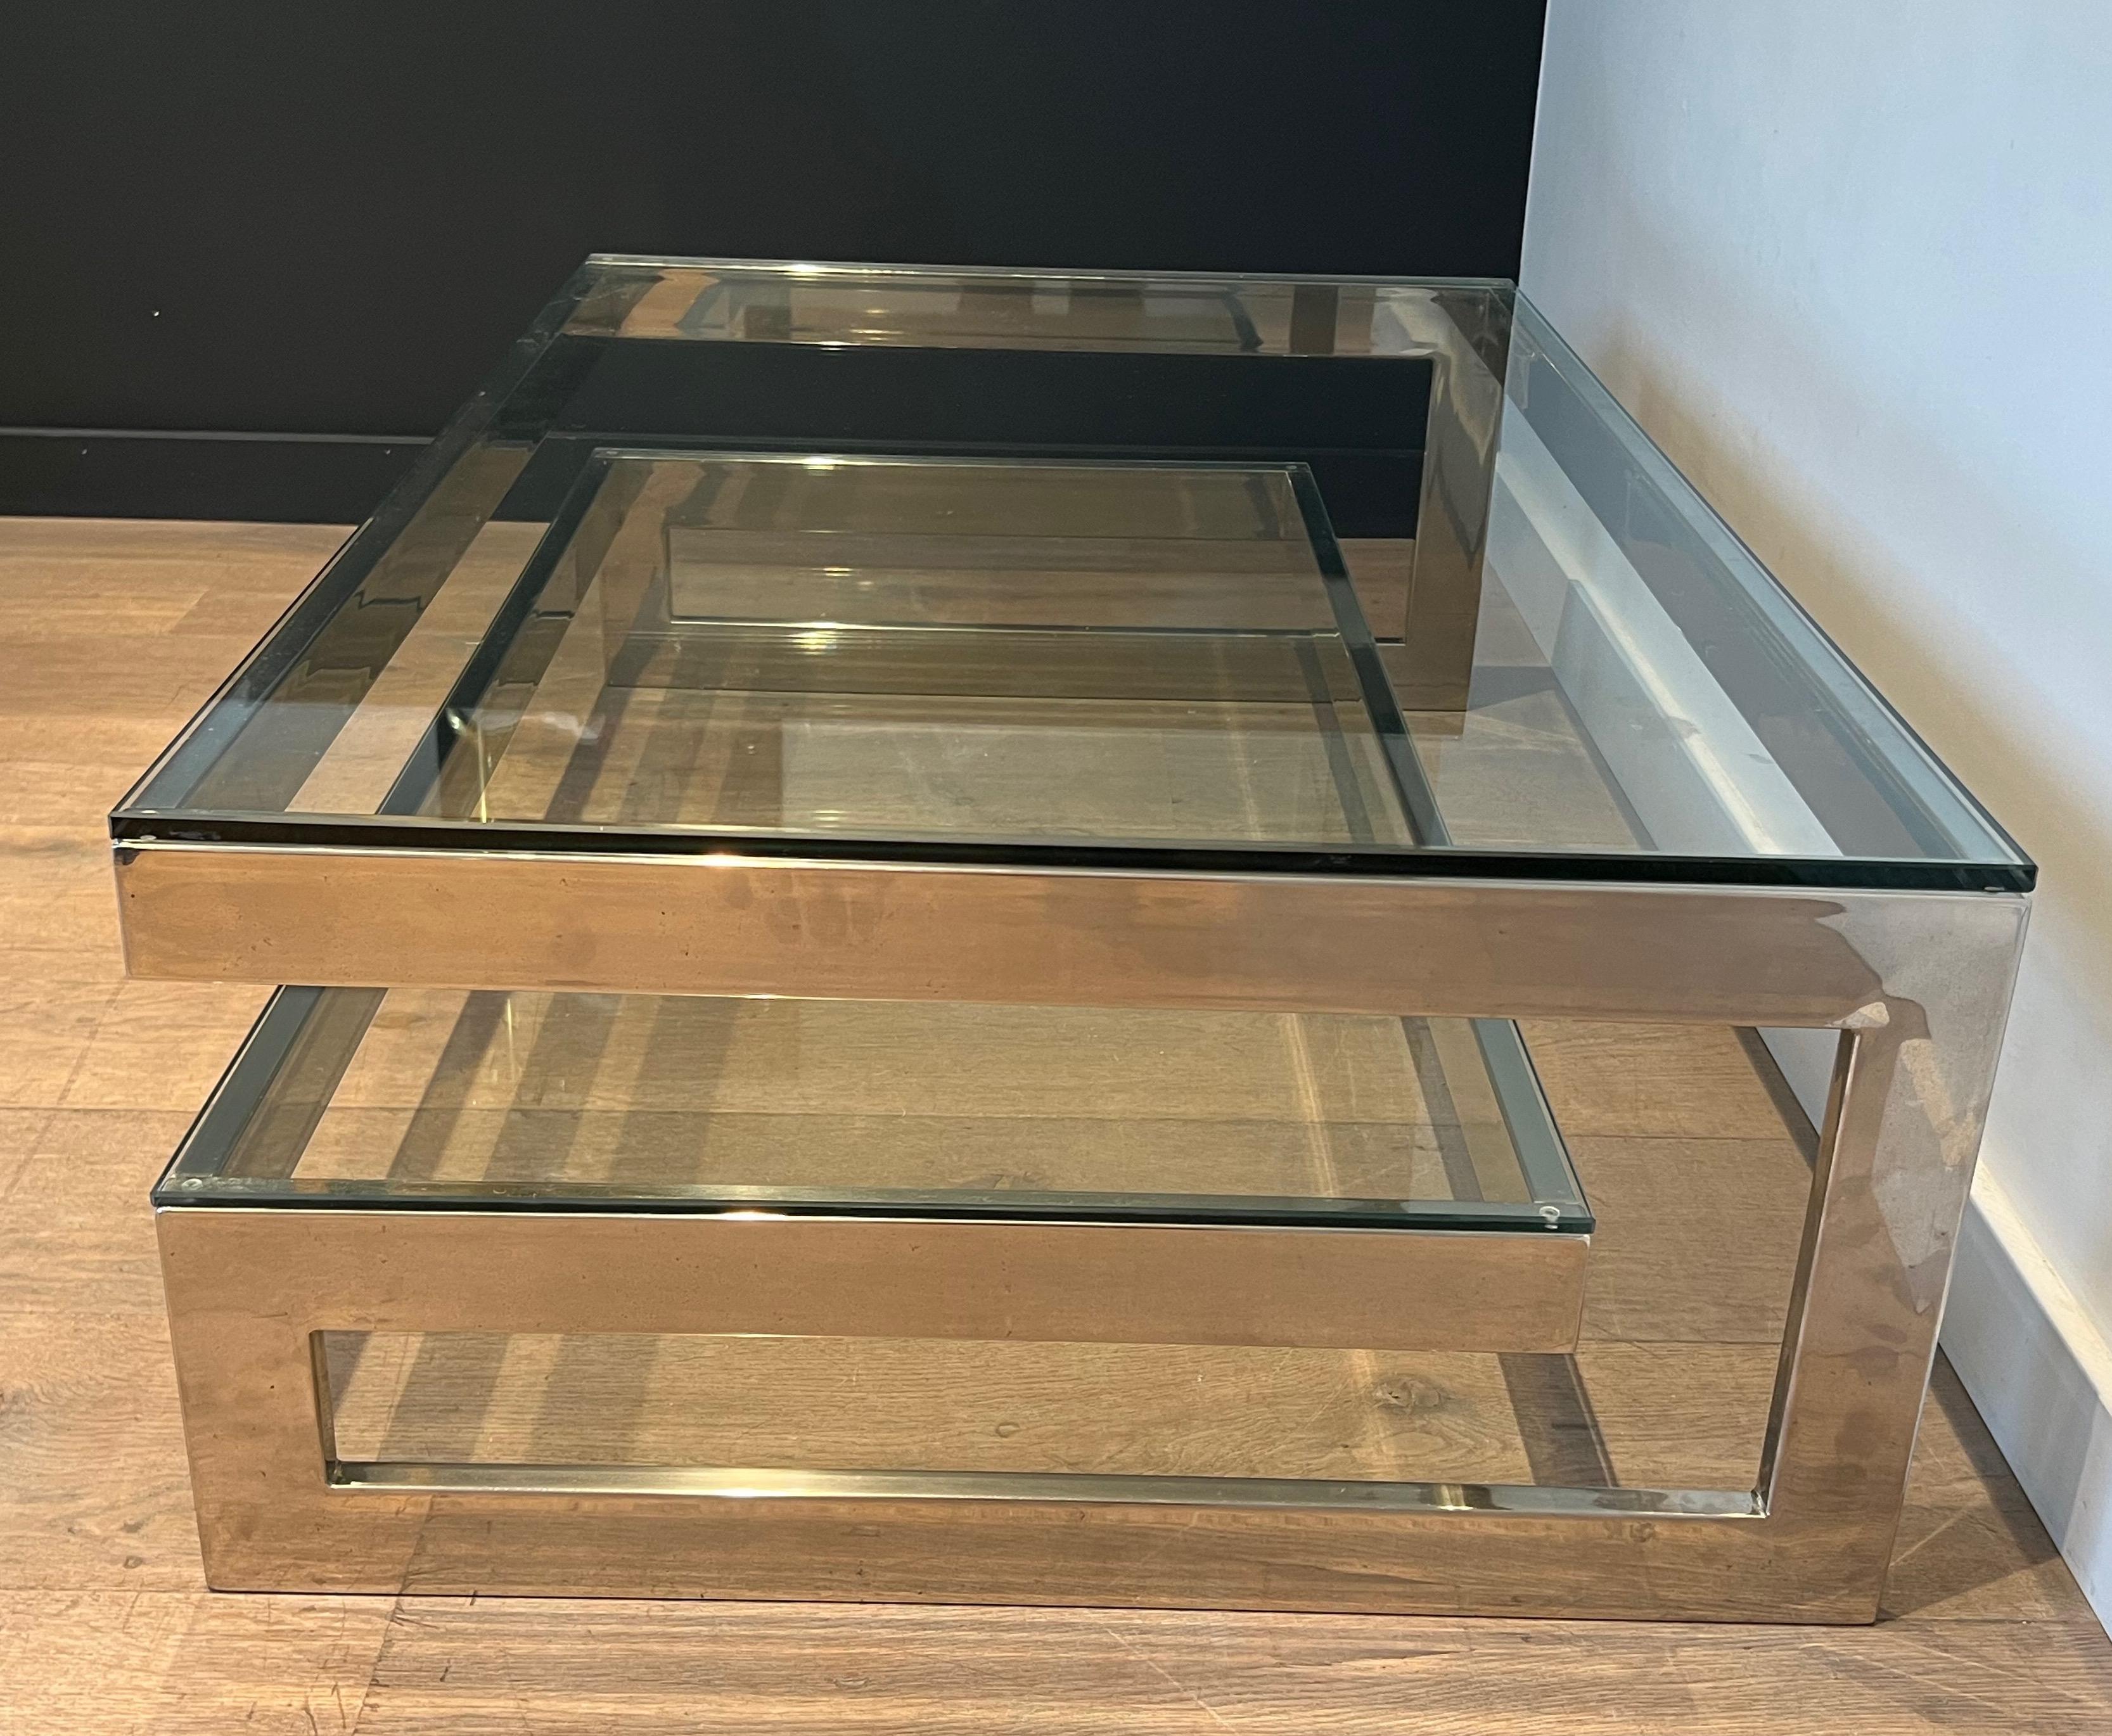 Late 20th Century Design Chrome Coffee Table with 2 Glass Shelves For Sale